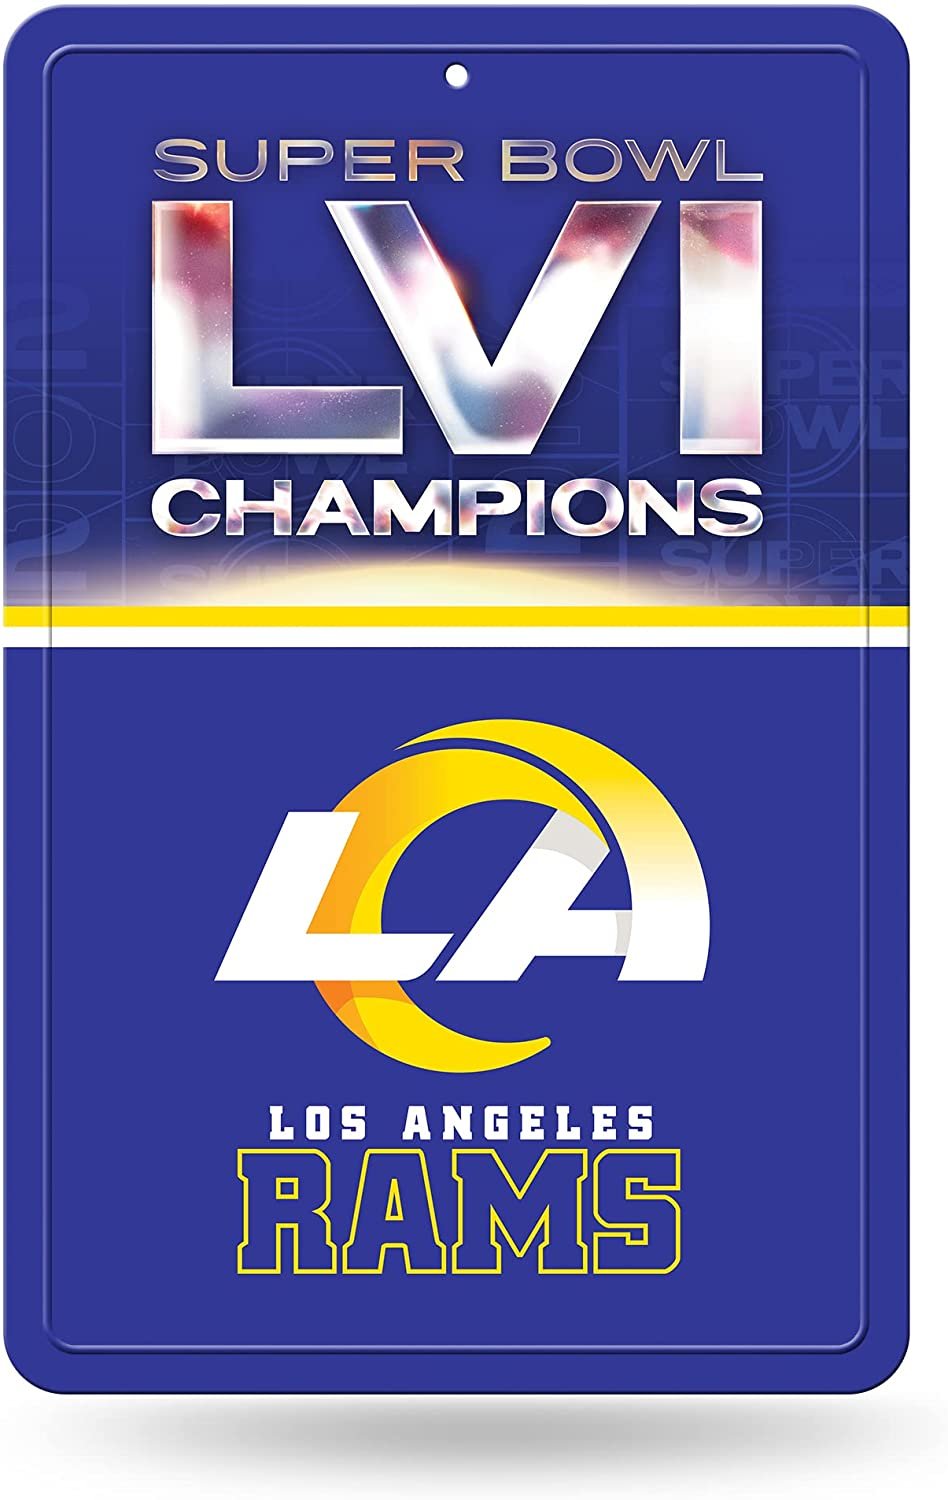 Los Angeles Rams 2022 Super Bowl LVI Champions Large Metal Sign, 11x17 Inch, Home or Office